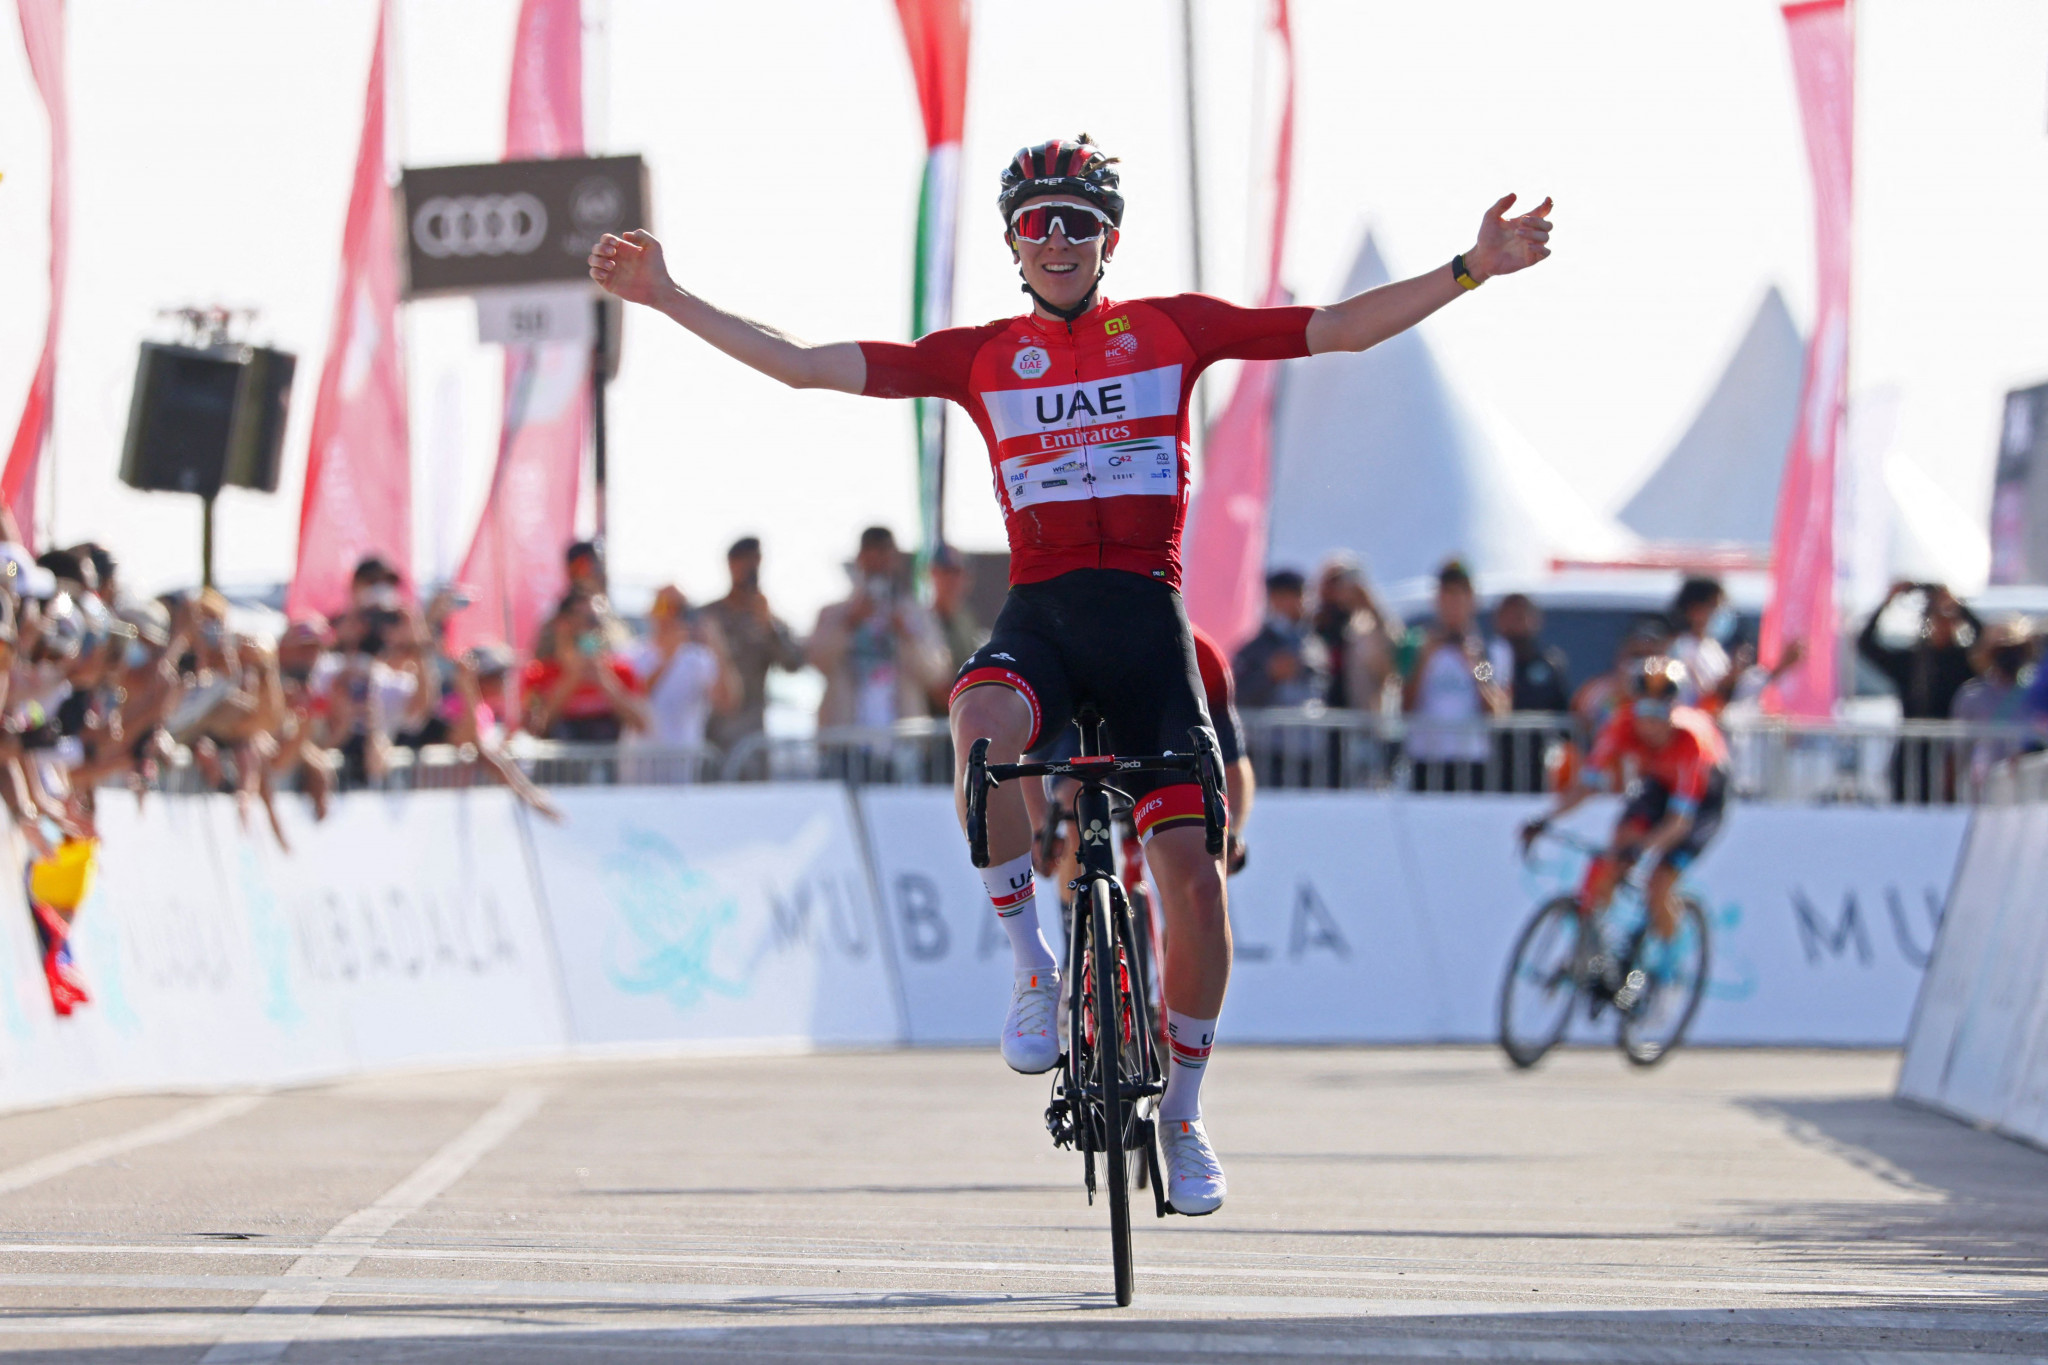 Pogačar wins final stage of UAE Tour to claim overall title in style